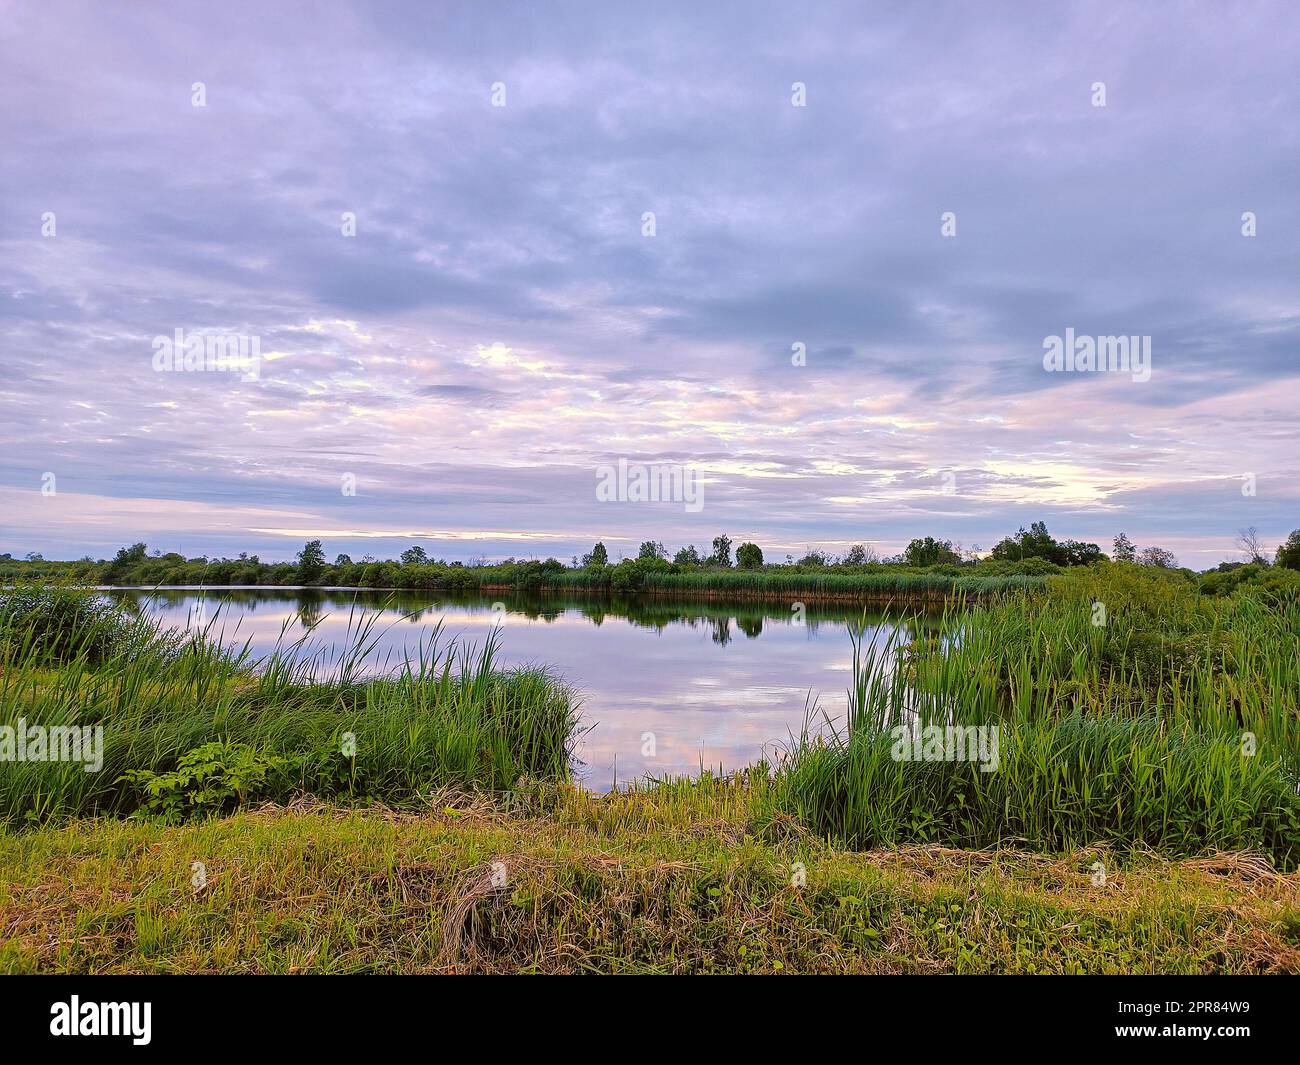 Calm water on lake. Storm Rainy weather. Summer overcast sky. Dramatic landscape, cloudy day. Stock Photo